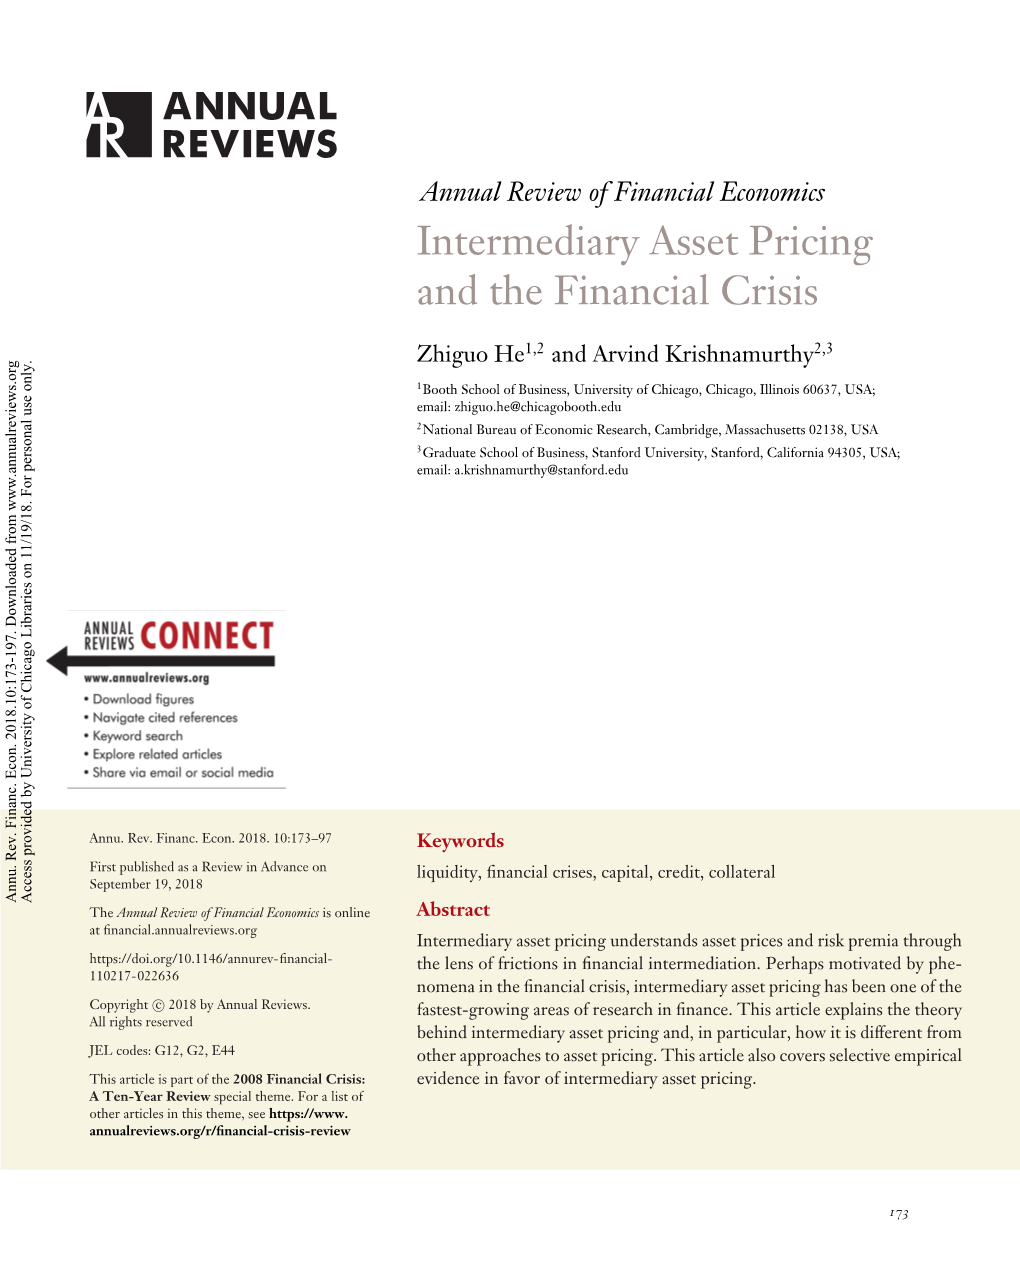 Intermediary Asset Pricing and the Financial Crisis